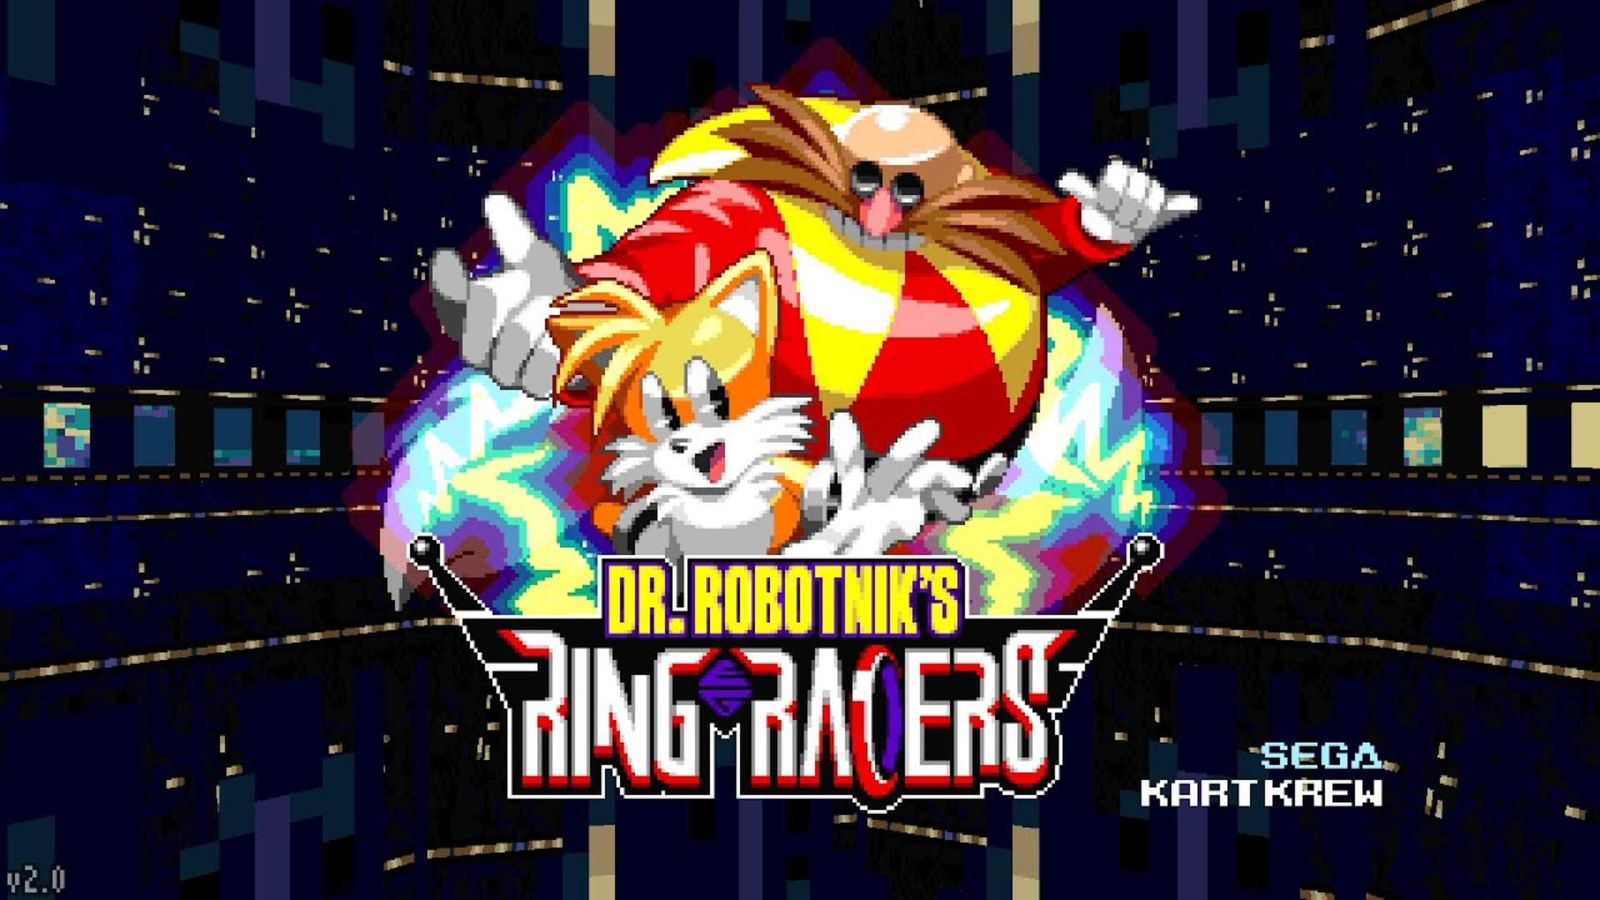 dr robotnik's ring racers awesome-looking sonic fan game